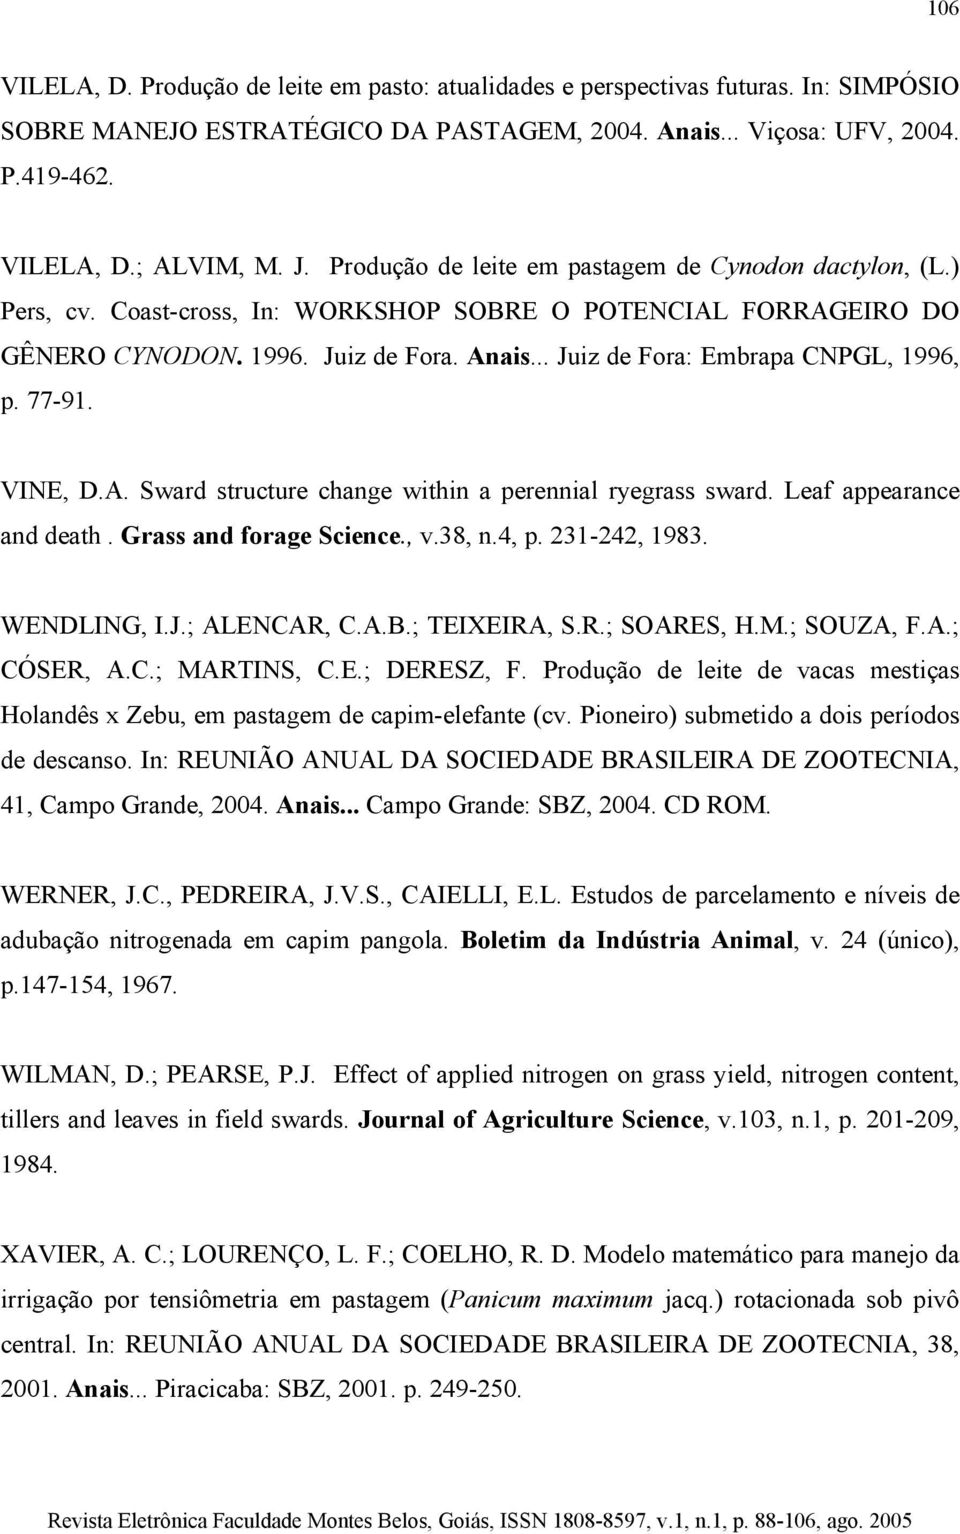 .. Juiz de Fora: Embrapa CNPGL, 1996, p. 77-91. VINE, D.A. Sward structure change within a perennial ryegrass sward. Leaf appearance and death. Grass and forage Science., v.38, n.4, p. 231-242, 1983.